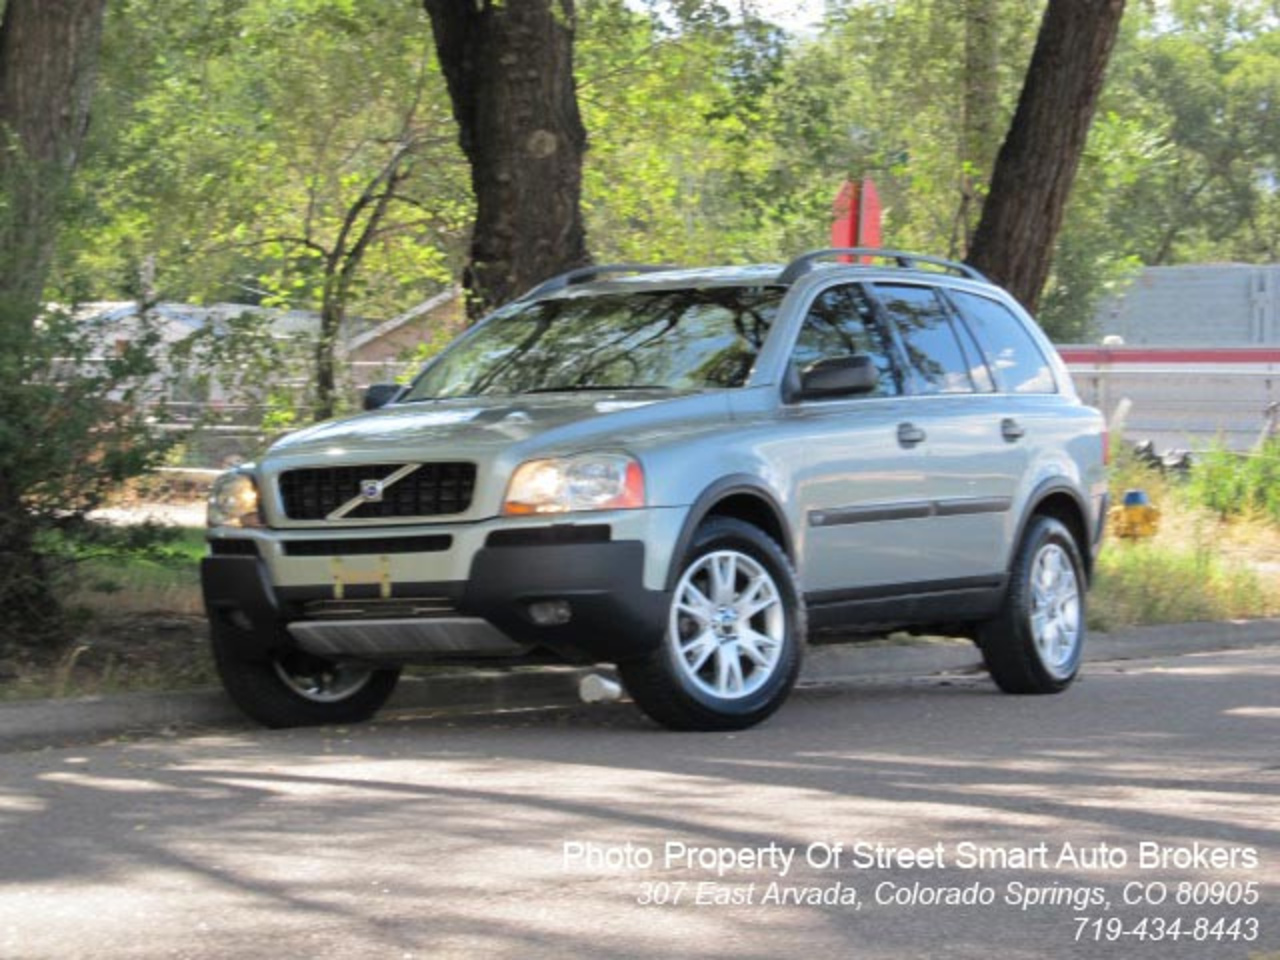 Used 2004 Volvo XC90 AWD for sale - Street Smart Auto Brokers ...